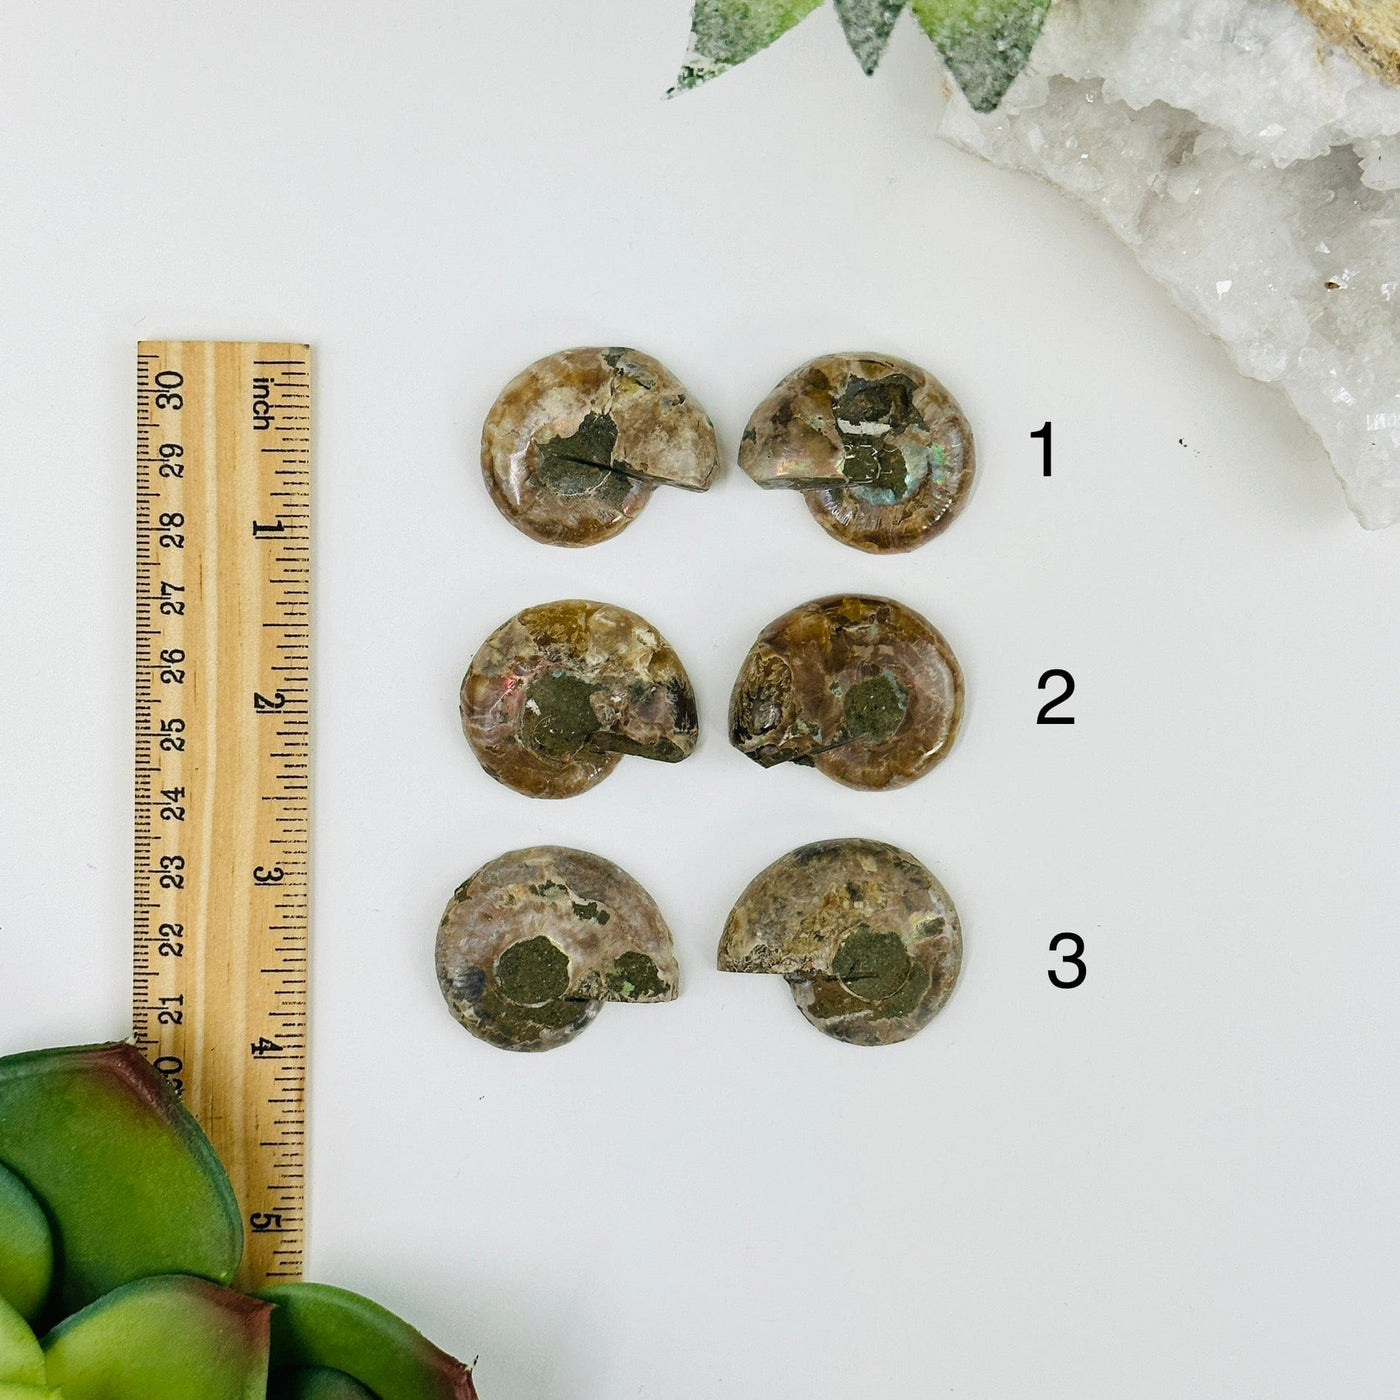 3 ammonite pairs next to a ruler for size reference